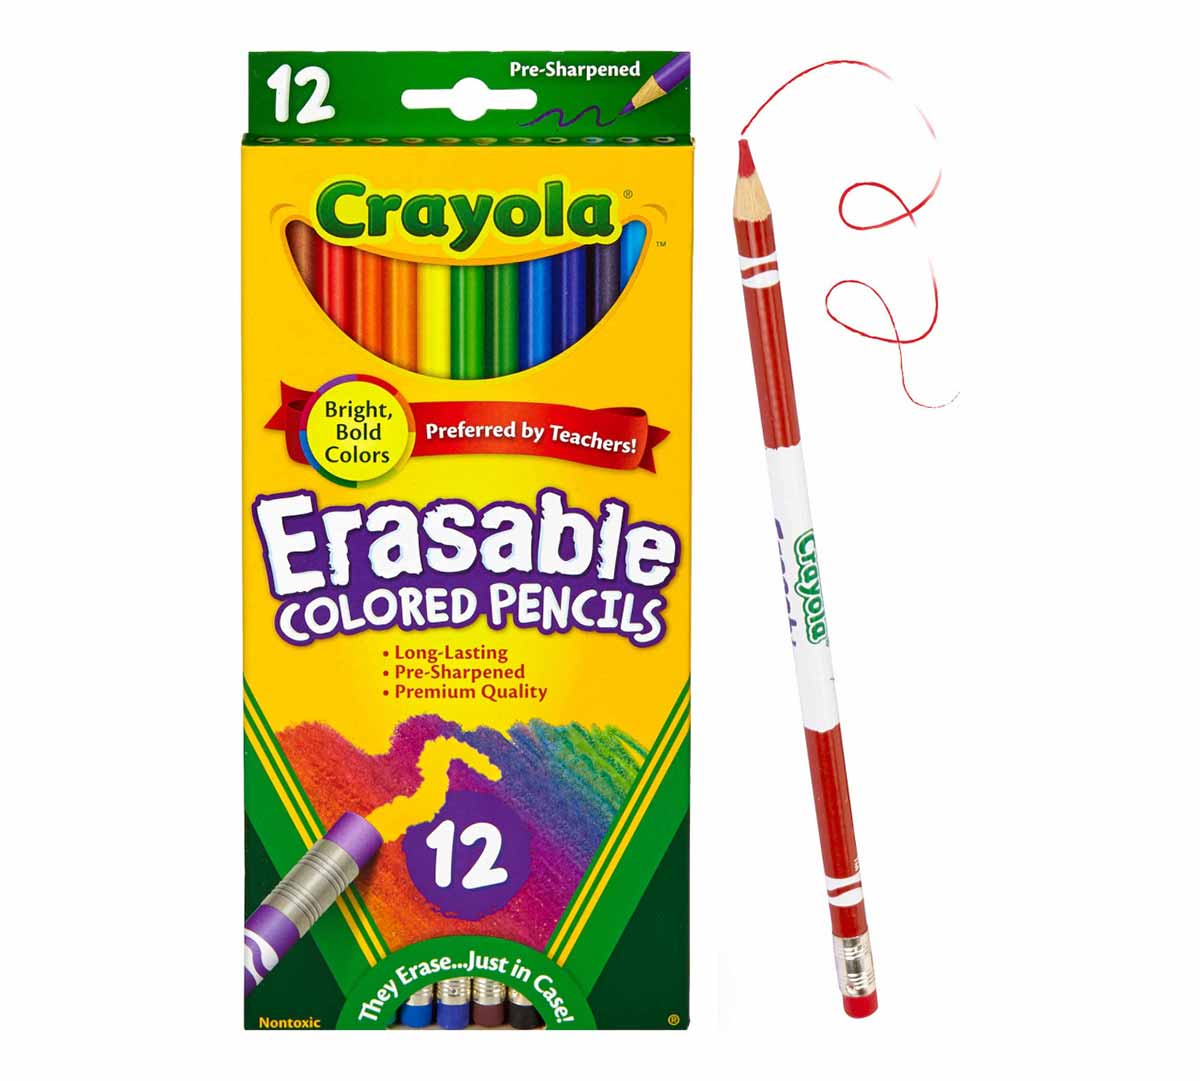 Crayola Colored Pencils, Adult & Kids Coloring, Fun At Home